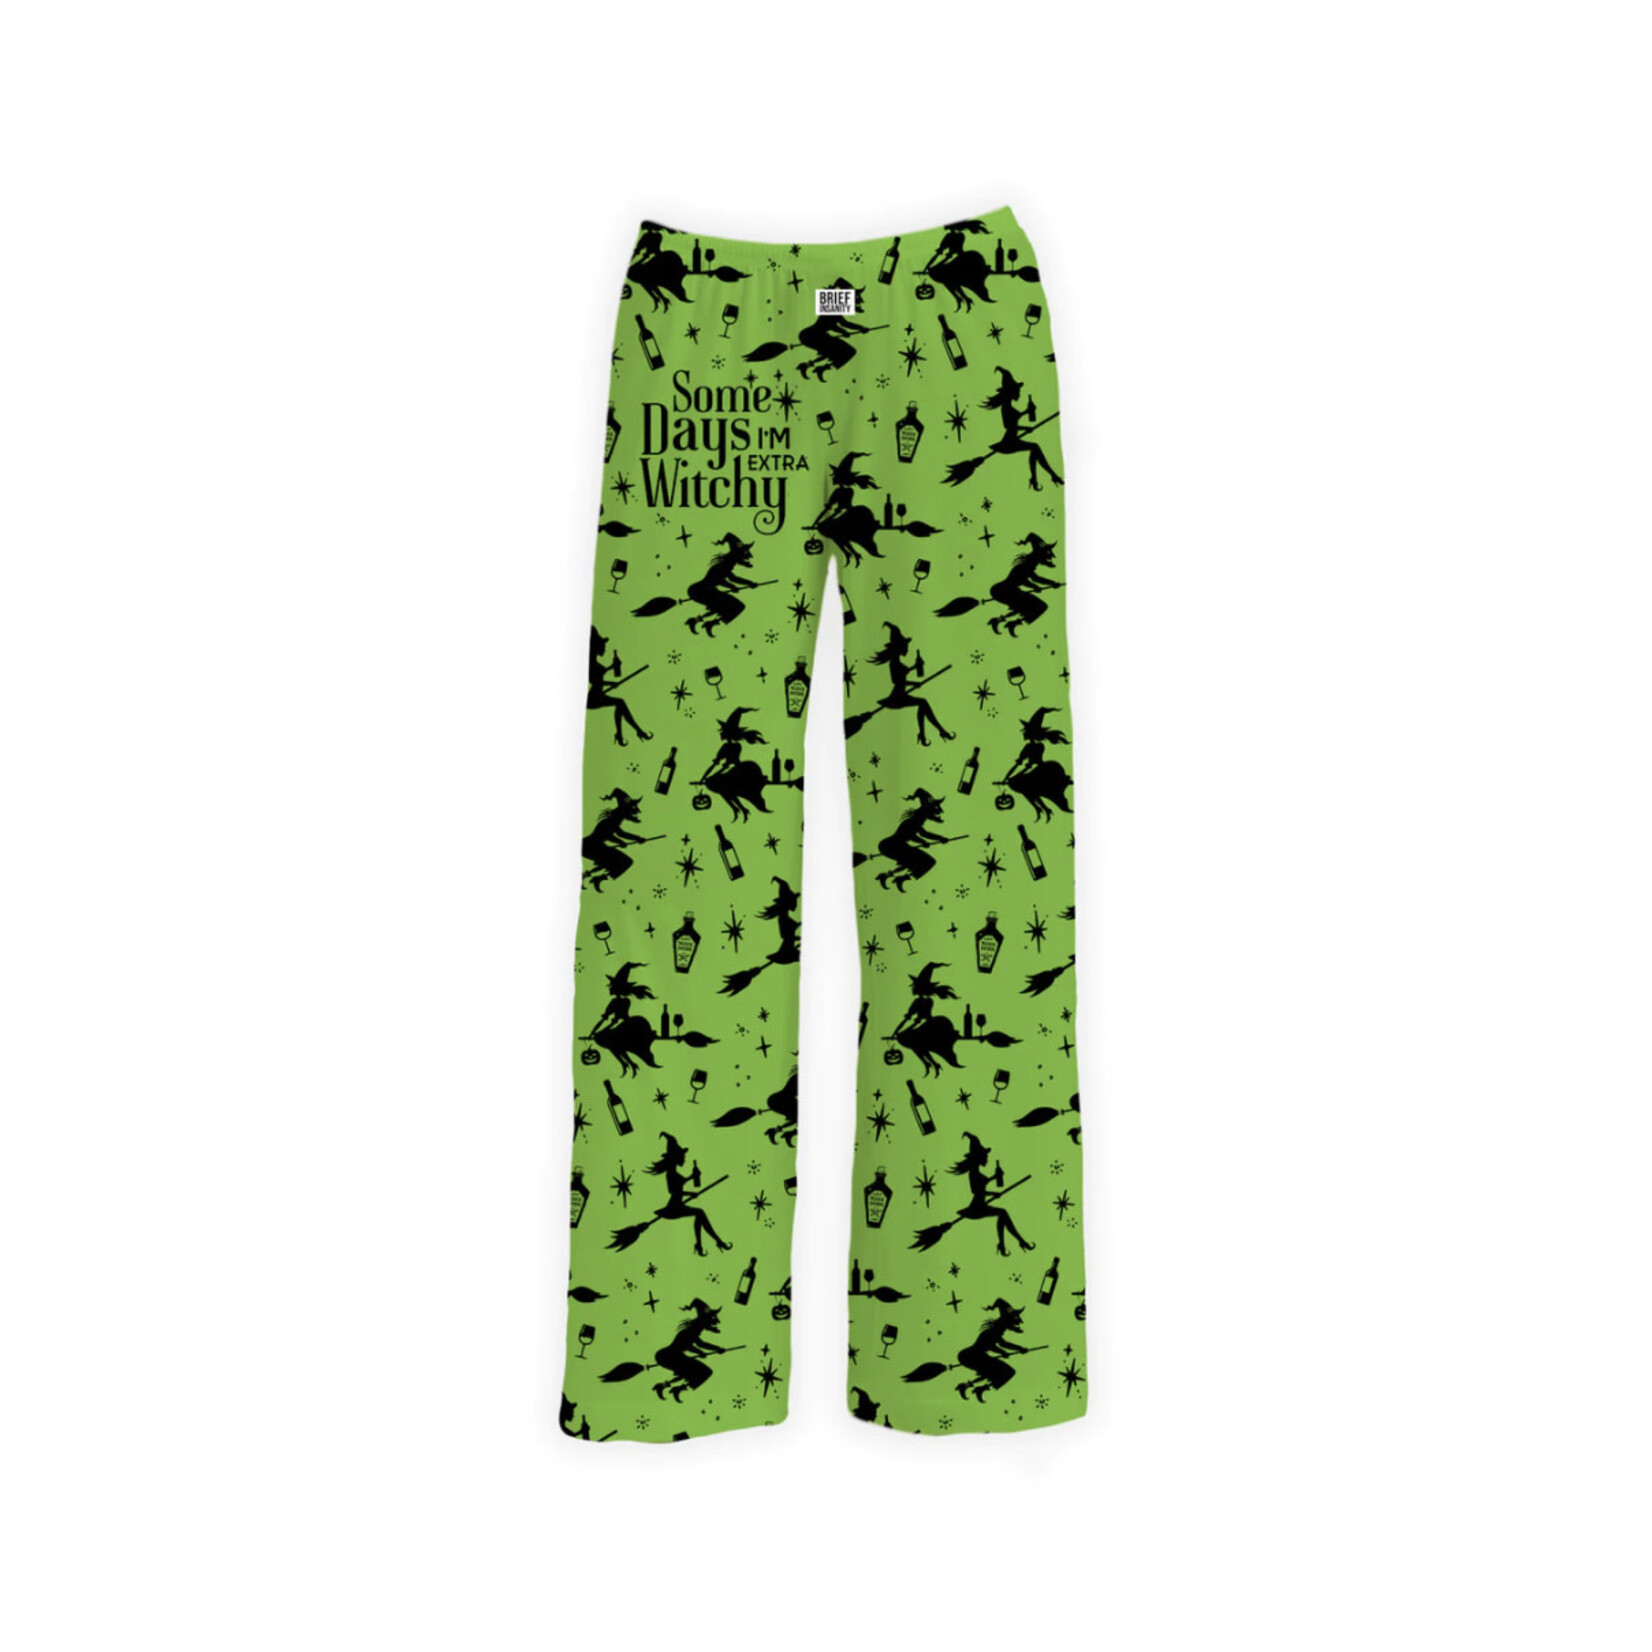 Brief Insanity Brief Insanity Witchy Lounge Pants